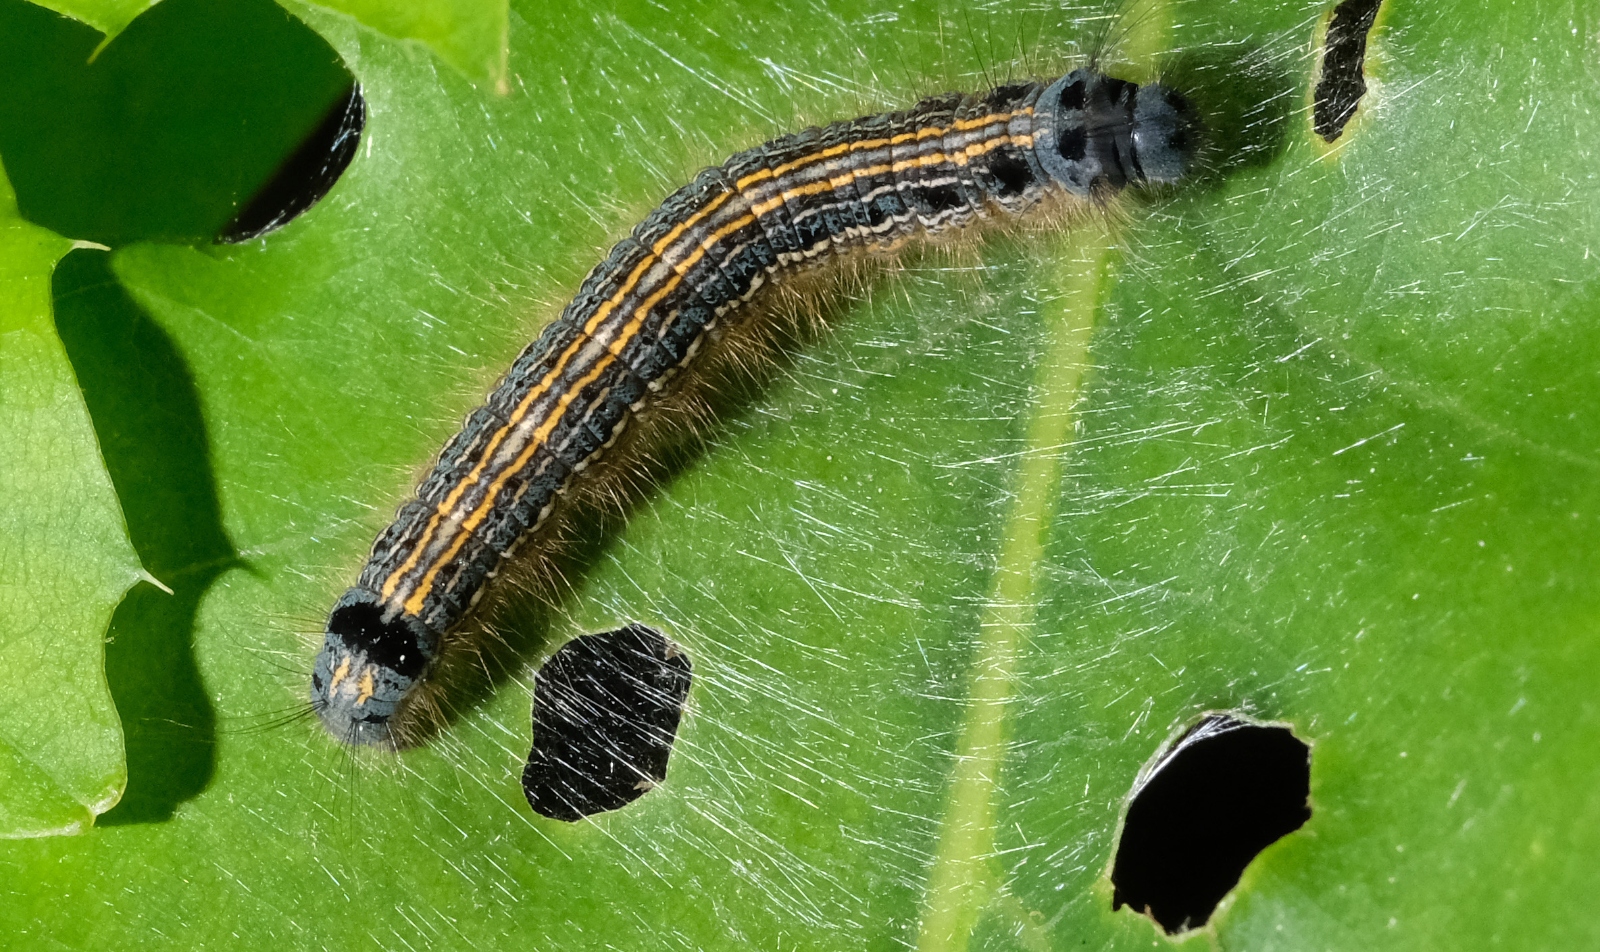 A dark brown and blue speckled caterpillar sits on a green leaf that has been chewed several times